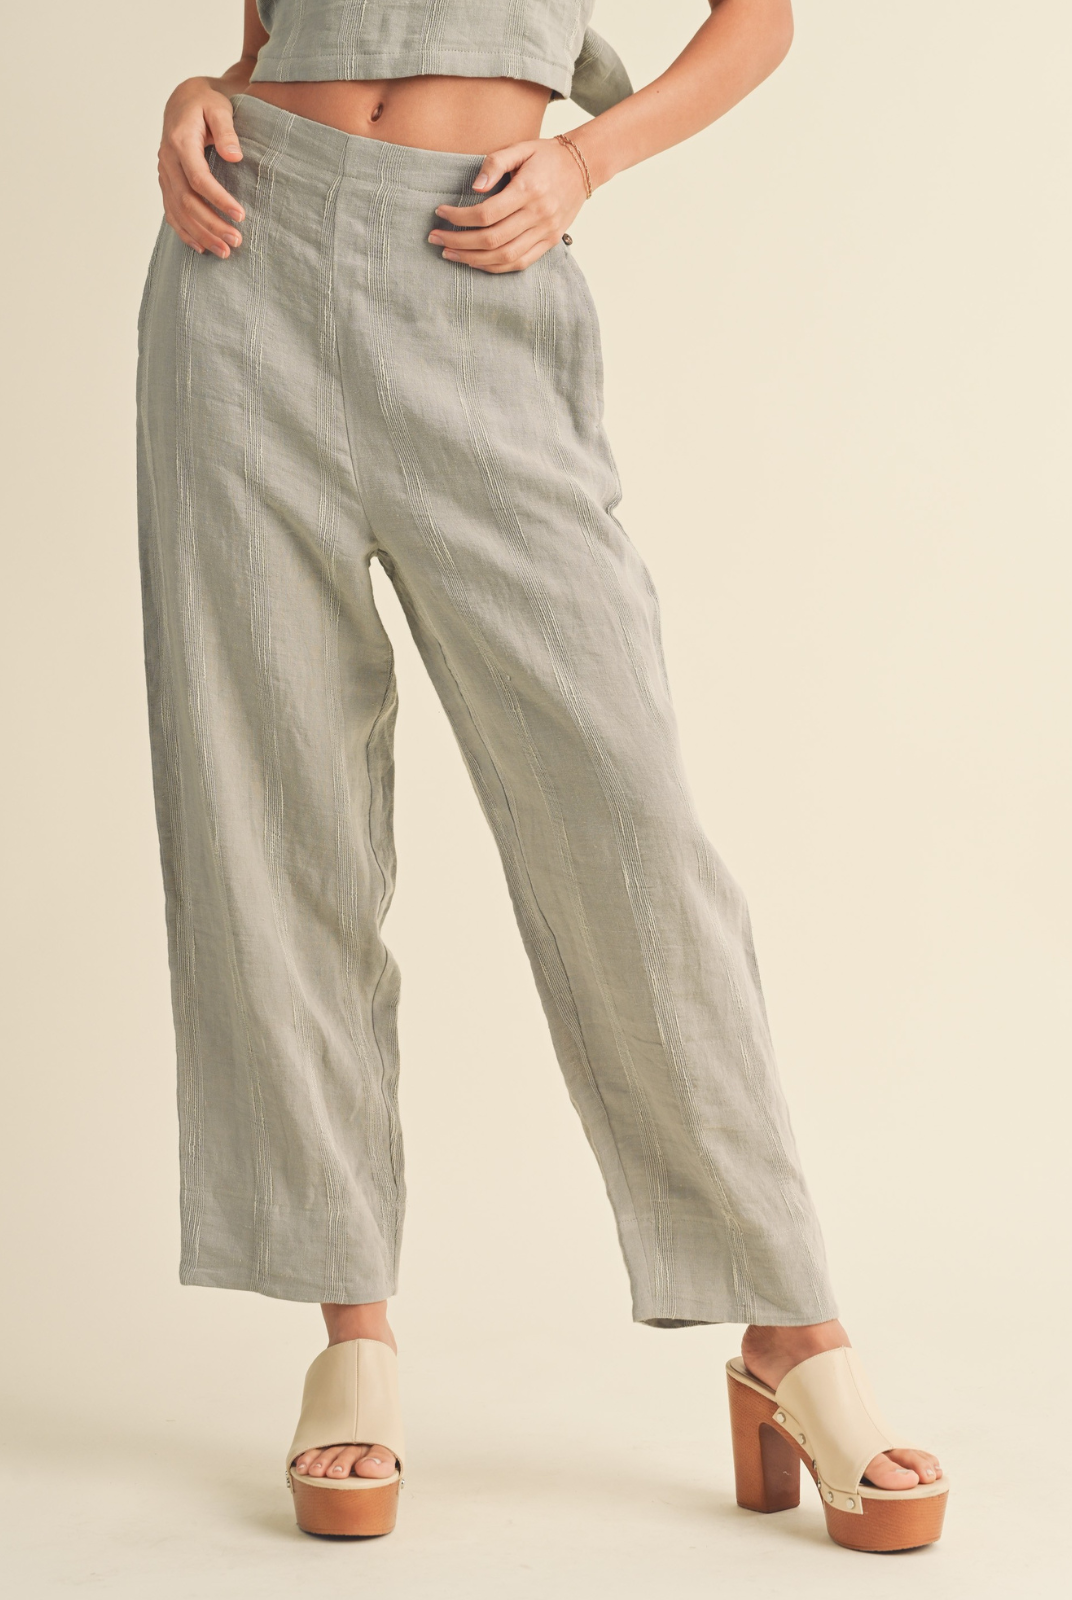 Freida Button-Down PantDiscover the perfect blend of style and comfort with the Miou Muse Freida Button-Down Pant in a refreshing straw color. Made from a high-quality mix of 76% linen, 20% cotton, and 4% polyester, these pants offer a unique texture and a chic side button detail, perfect for adding a touch of elegance to any outfit.